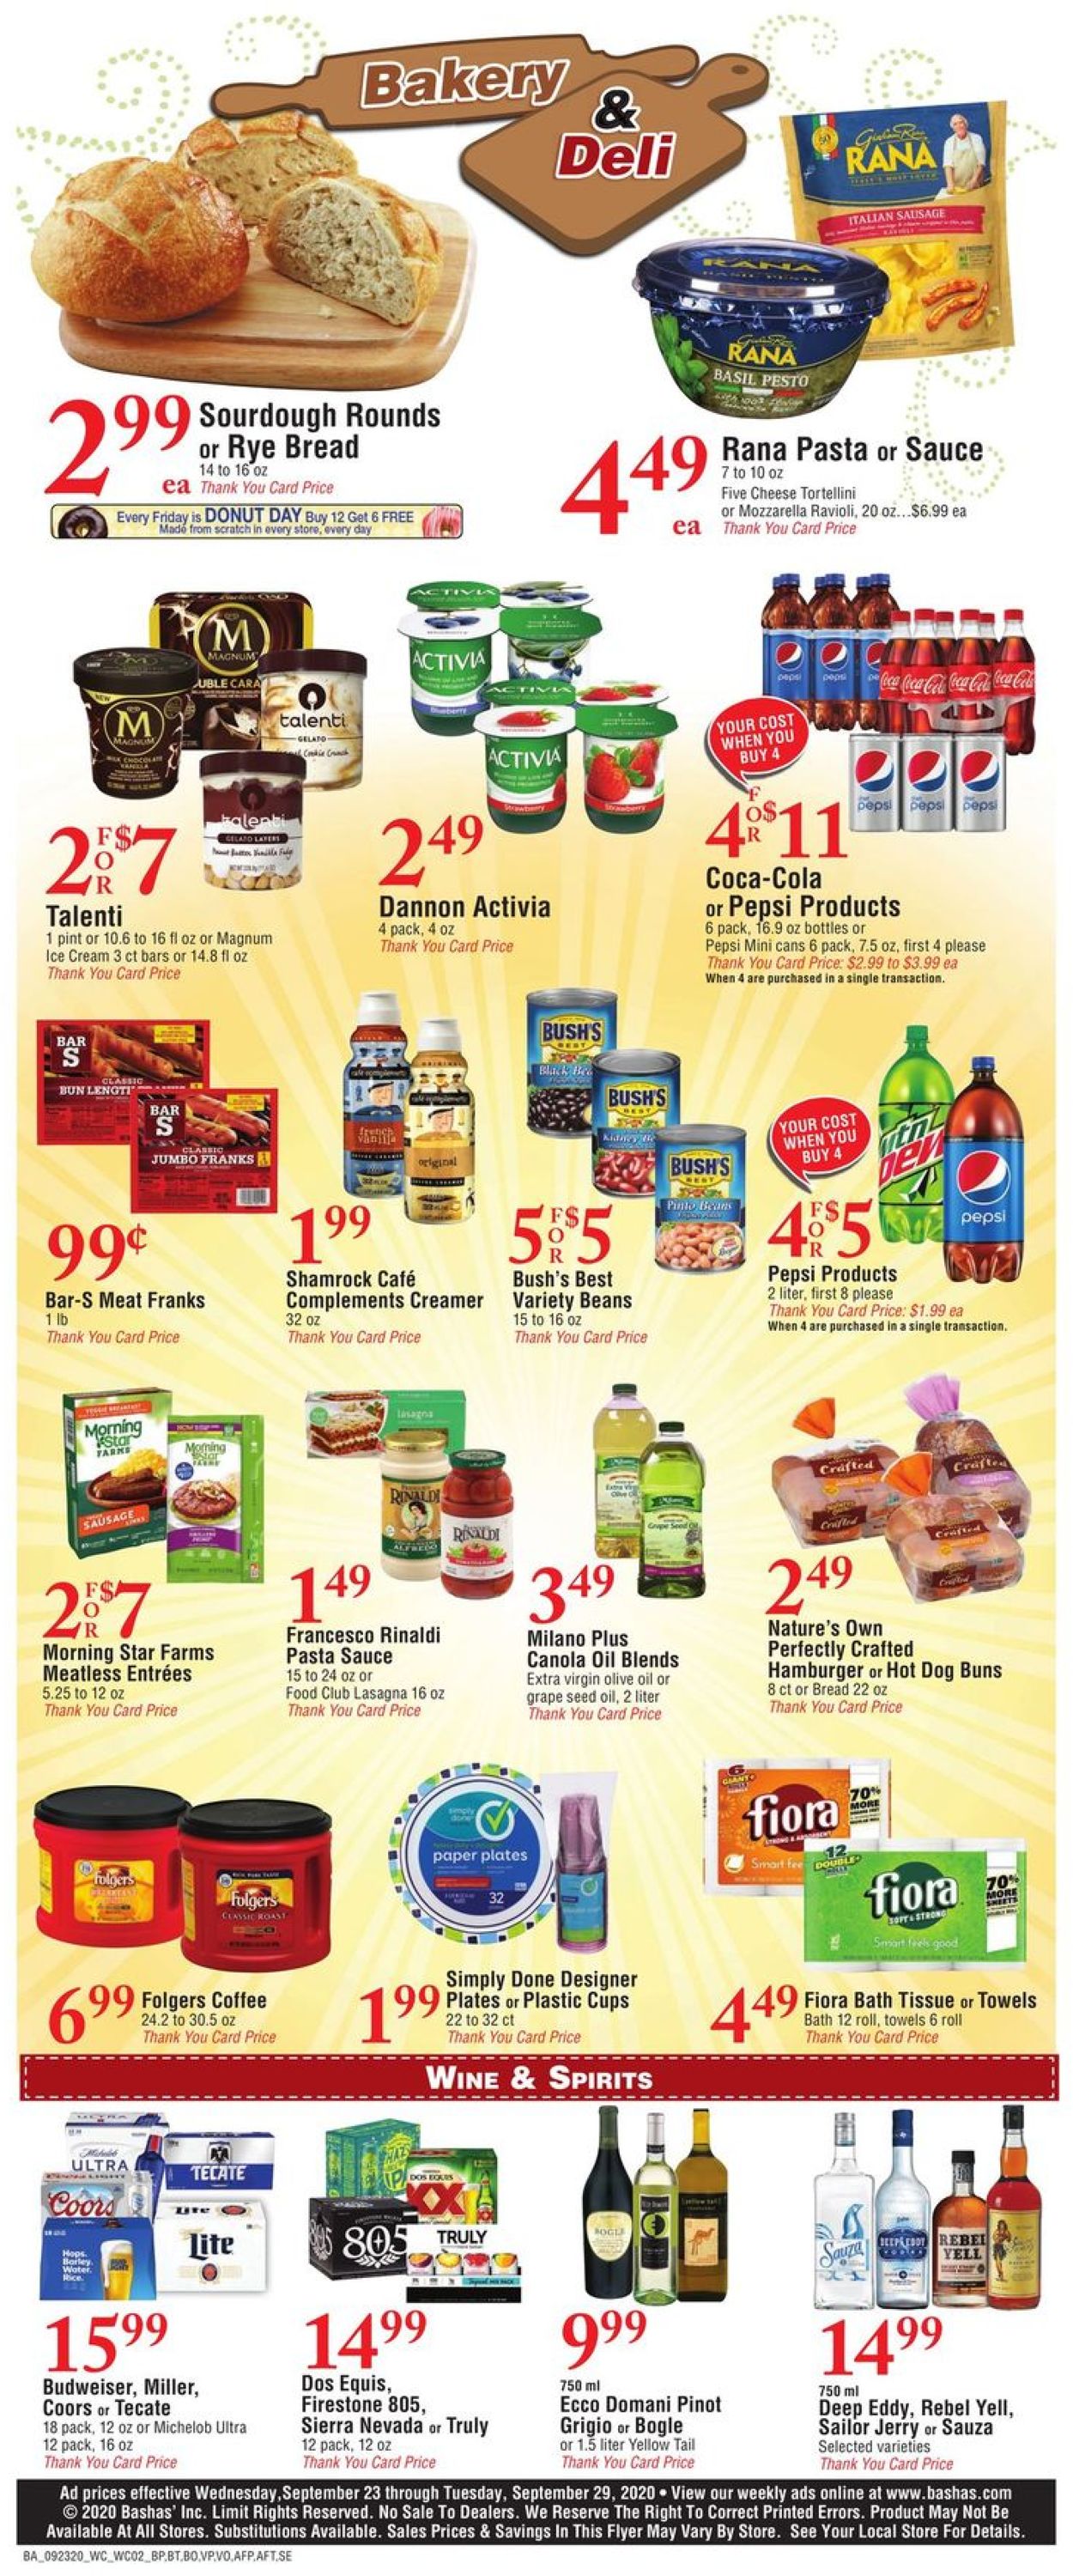 Bashas Ad from 09/23/2020